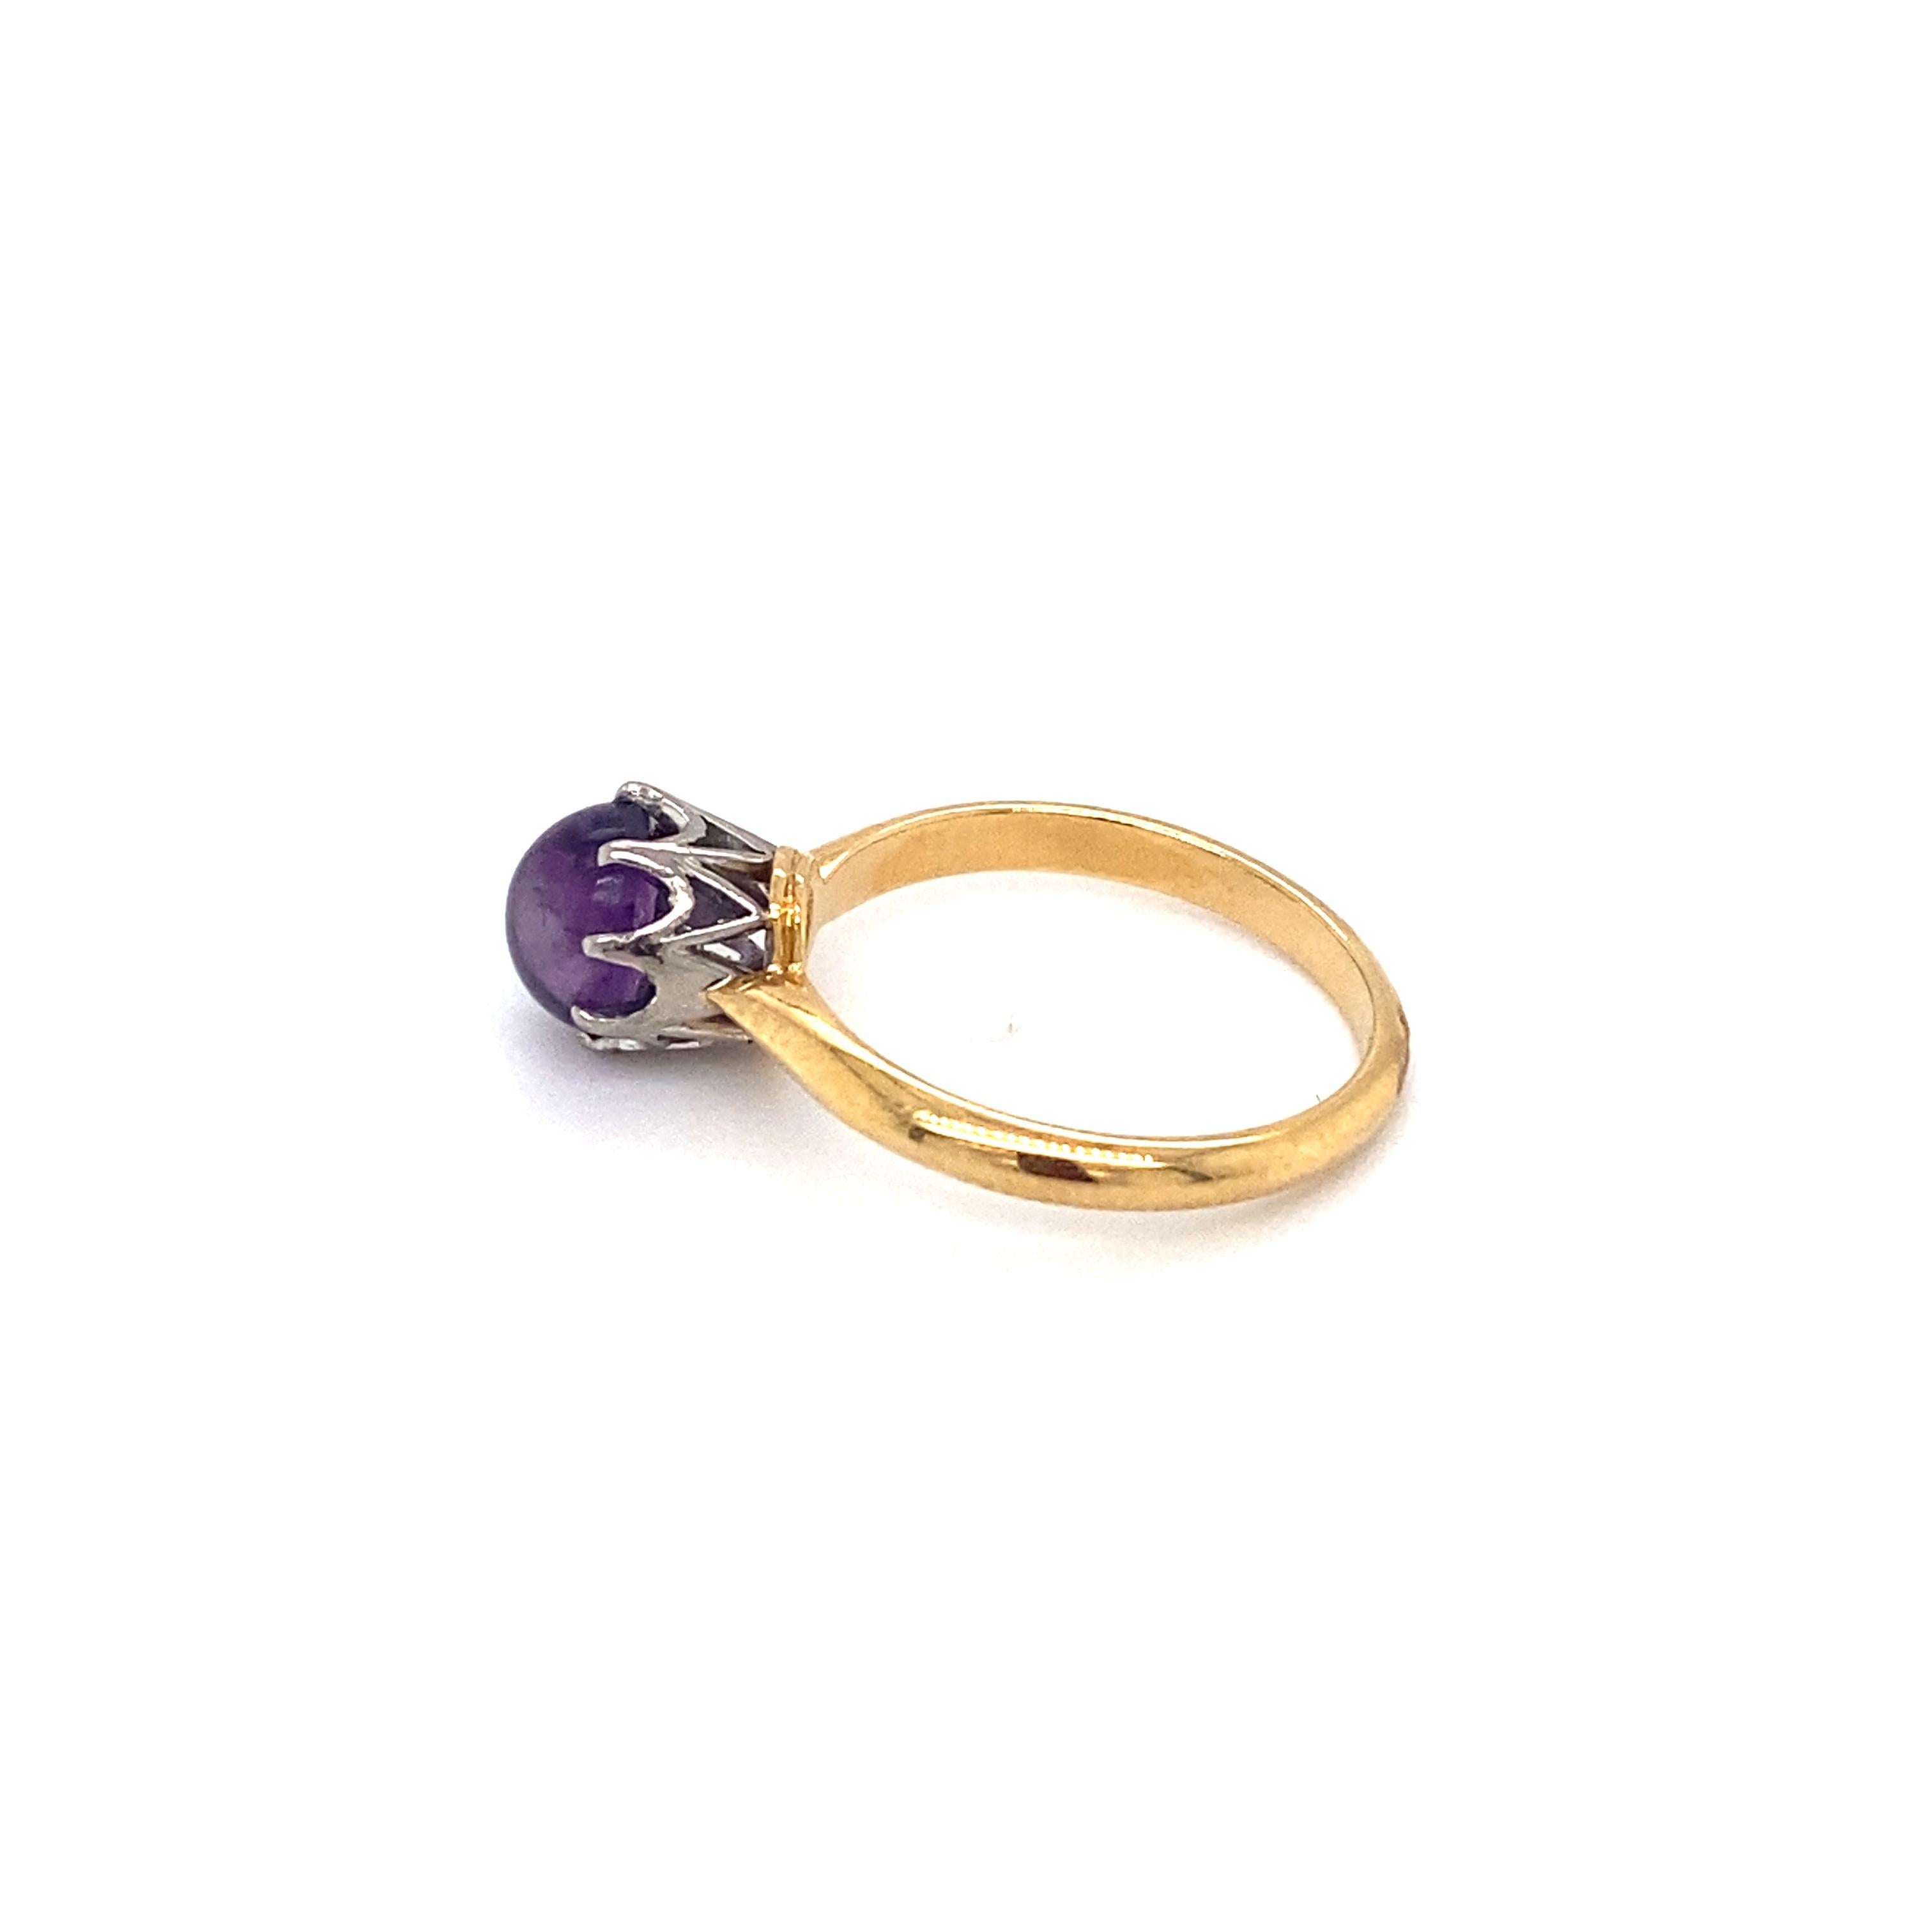 Item Details: 
Ring Size: 5.5
Metal Type: 18k yellow and white gold
Weight: 3.0 grams

Center Stone Details:
Stone Type: Cabachon Amethyst
Size: .75ct

Side Stone Details:
Stone Type: Diamonds
Weight: .25cttw
Color/ Clarity: G, VS1 (High Quality,